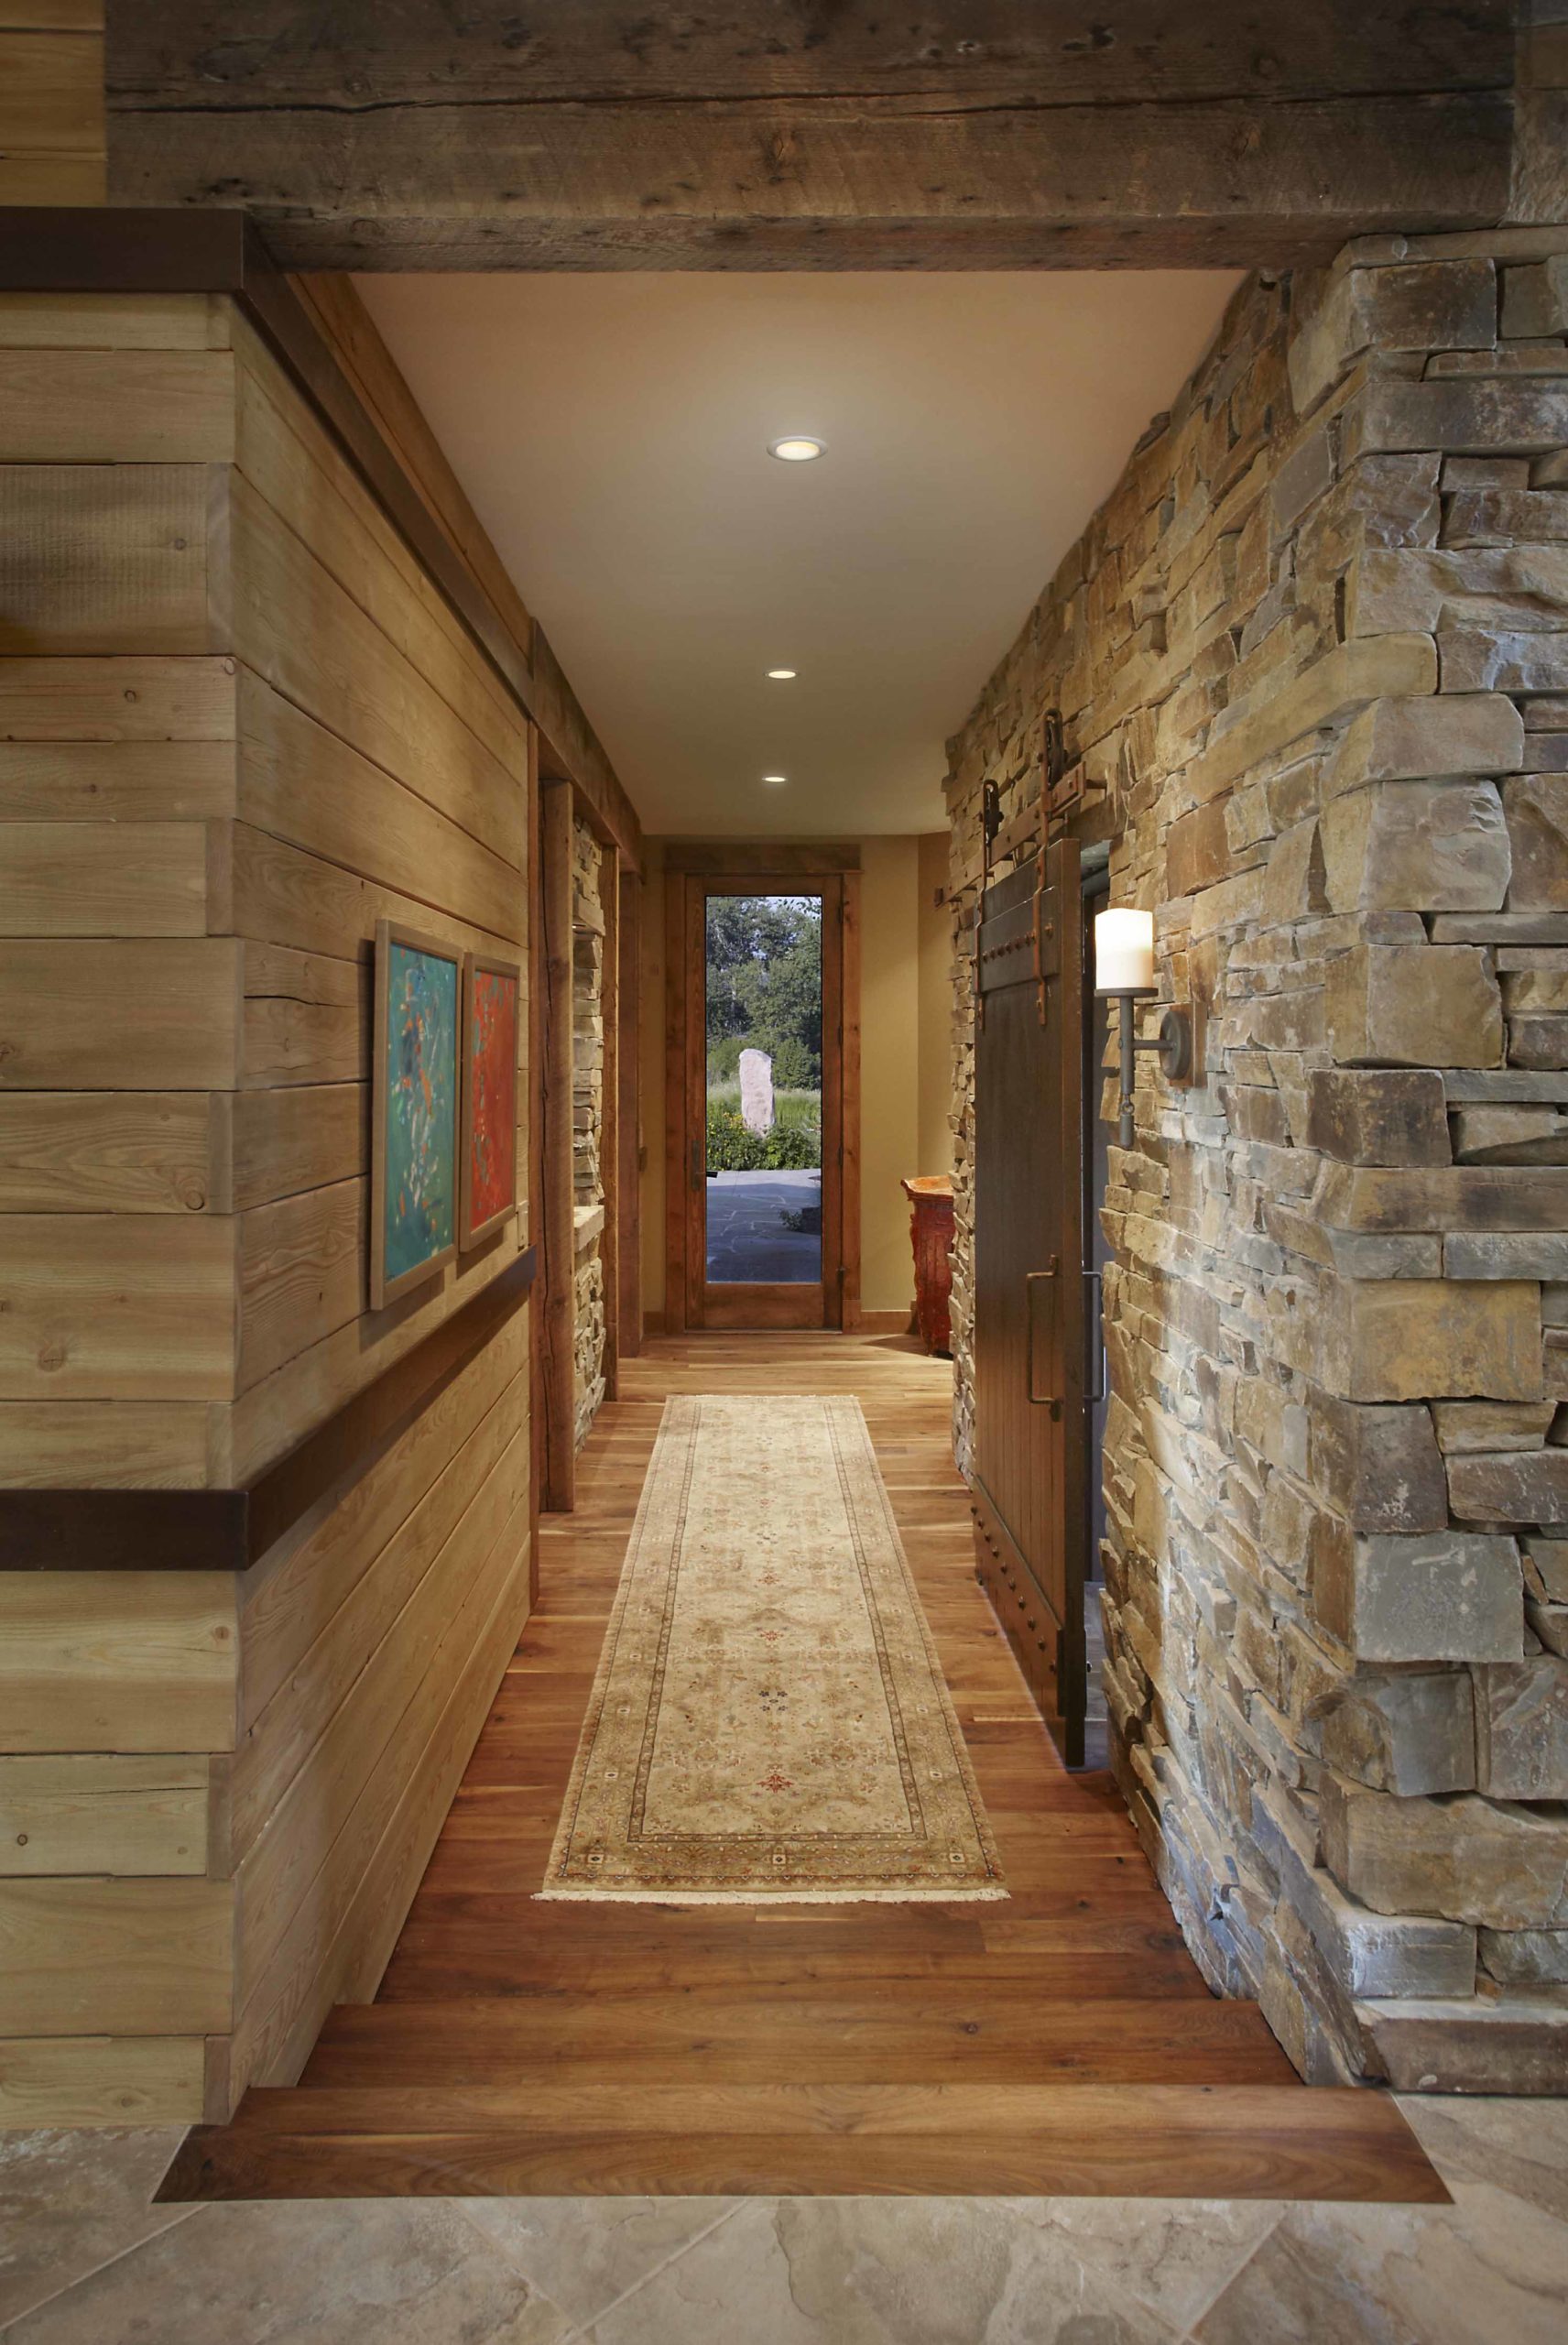 Hallway with one wood paneled wall, one stone wall and a long Persian runner on the wooden floors